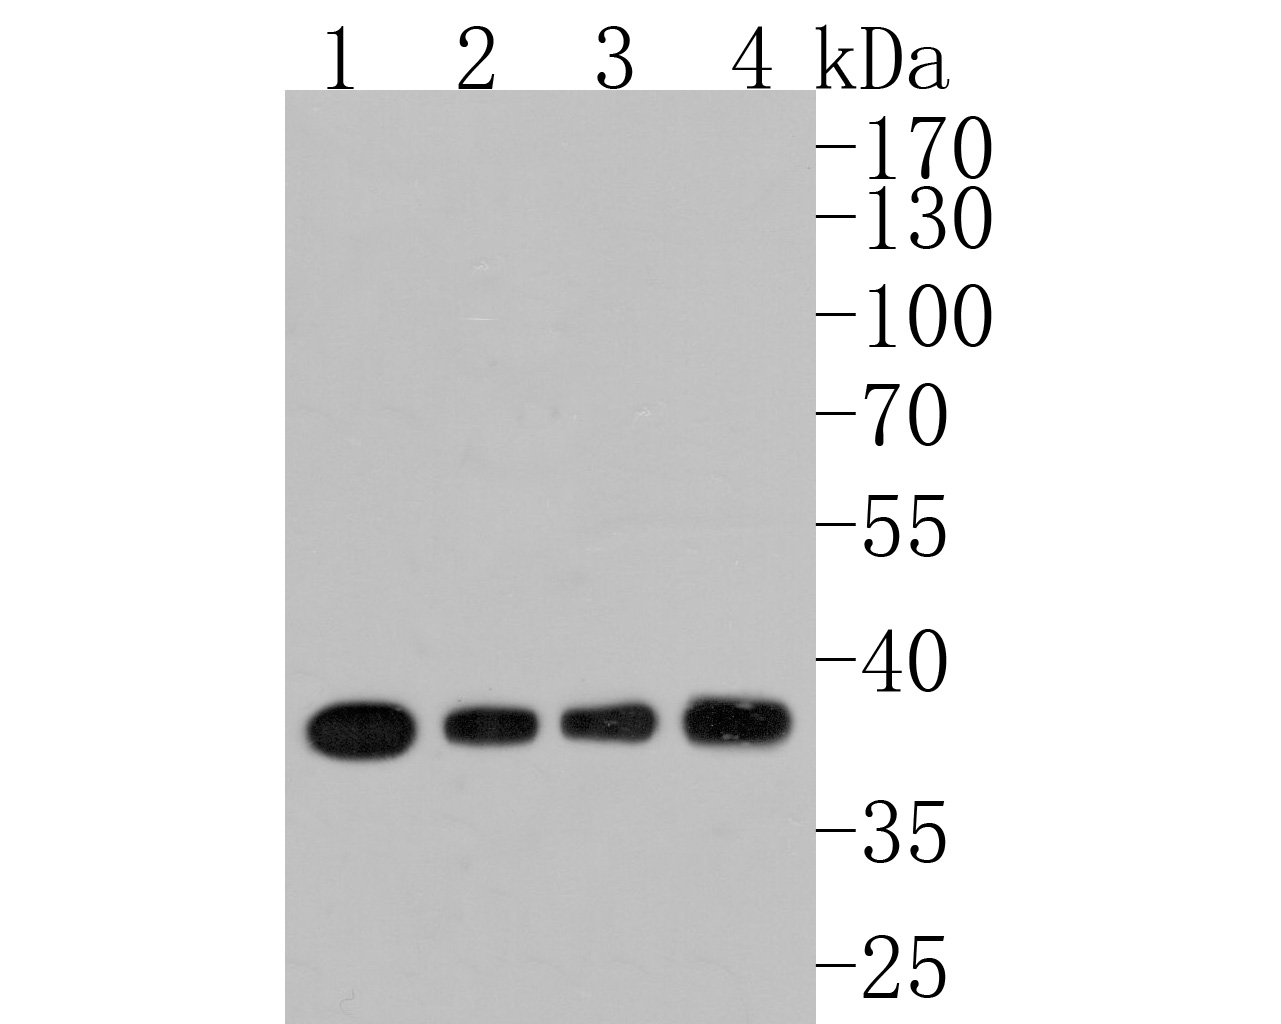 Western blot analysis of PPP1CA on different lysates. Proteins were transferred to a PVDF membrane and blocked with 5% BSA in PBS for 1 hour at room temperature. The primary antibody (HA500074, 1/5,000) was used in 5% BSA at room temperature for 2 hours. Goat Anti-Rabbit IgG - HRP Secondary Antibody (HA1001) at 1:200,000 dilution was used for 1 hour at room temperature.<br />
Positive control: <br />
Lane 1: MCF-7 cell lysate<br />
Lane 2: A549 cell lysate<br />
Lane 3: K562 cell lysate<br />
Lane 4: Hela cell lysate